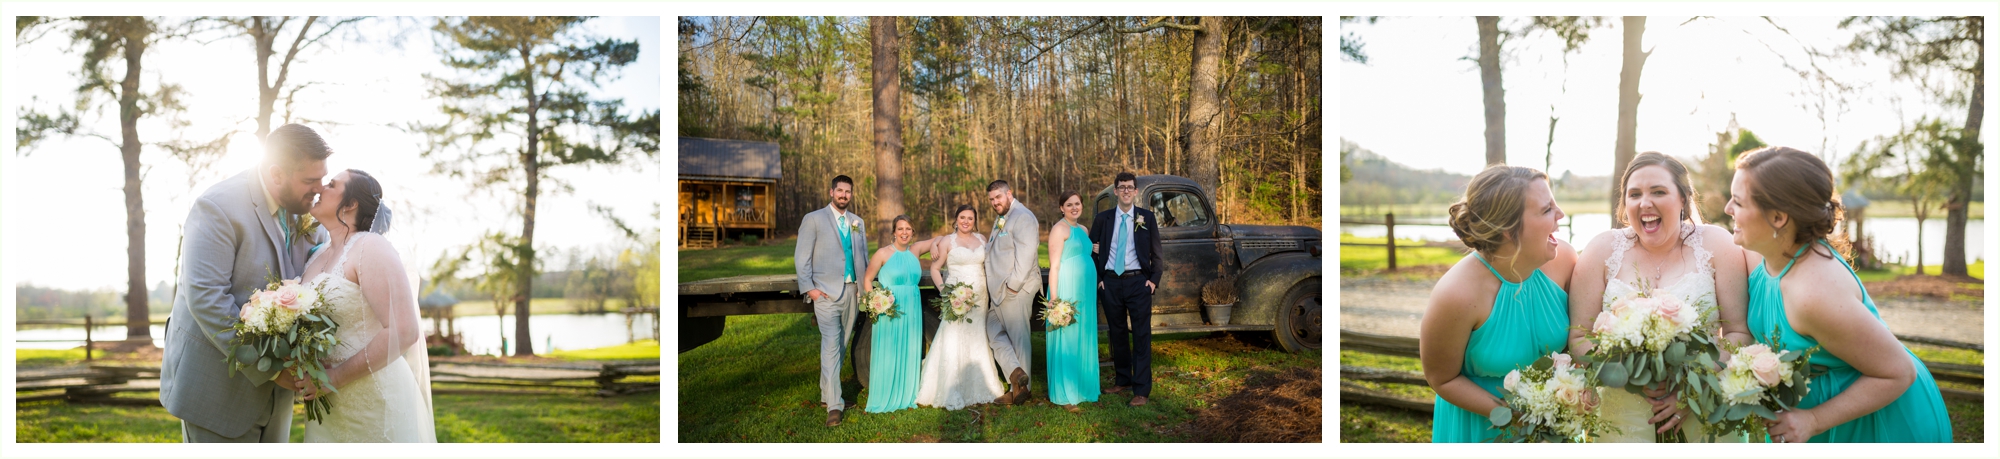 bridal party photos spring colors teal bridesmaids dresses in front of old truck